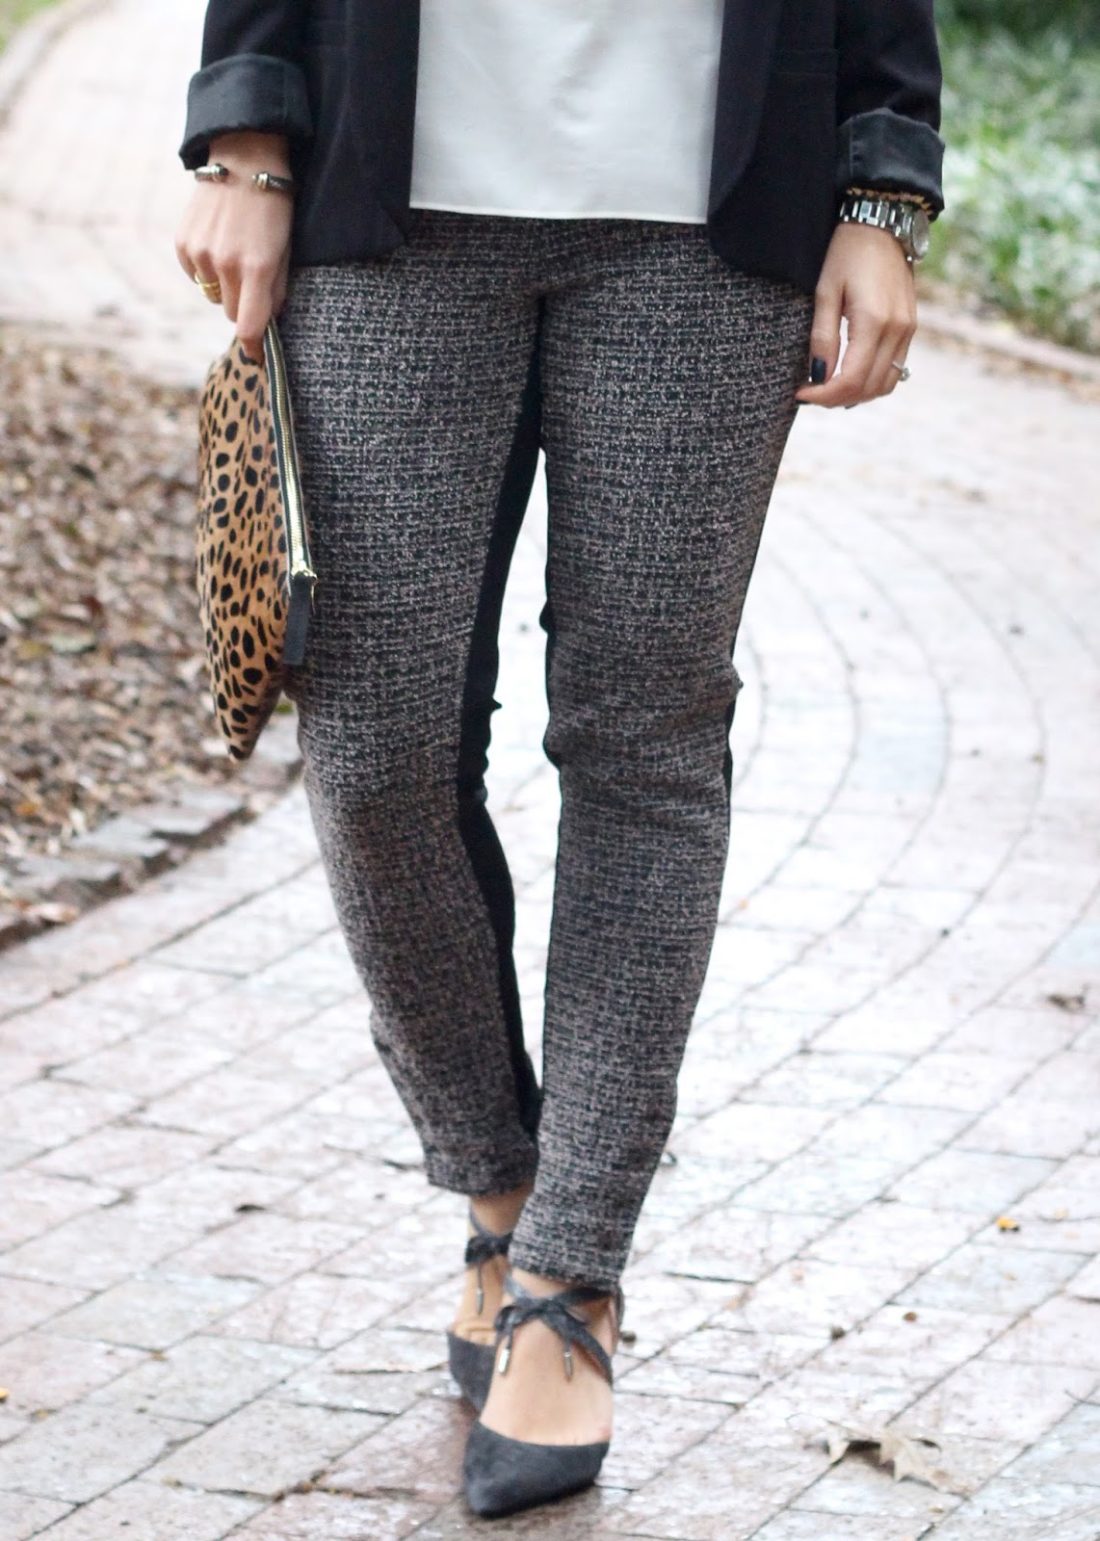 Tweed Leggings (That You Can Wear to Work!) - Medicine & Manicures